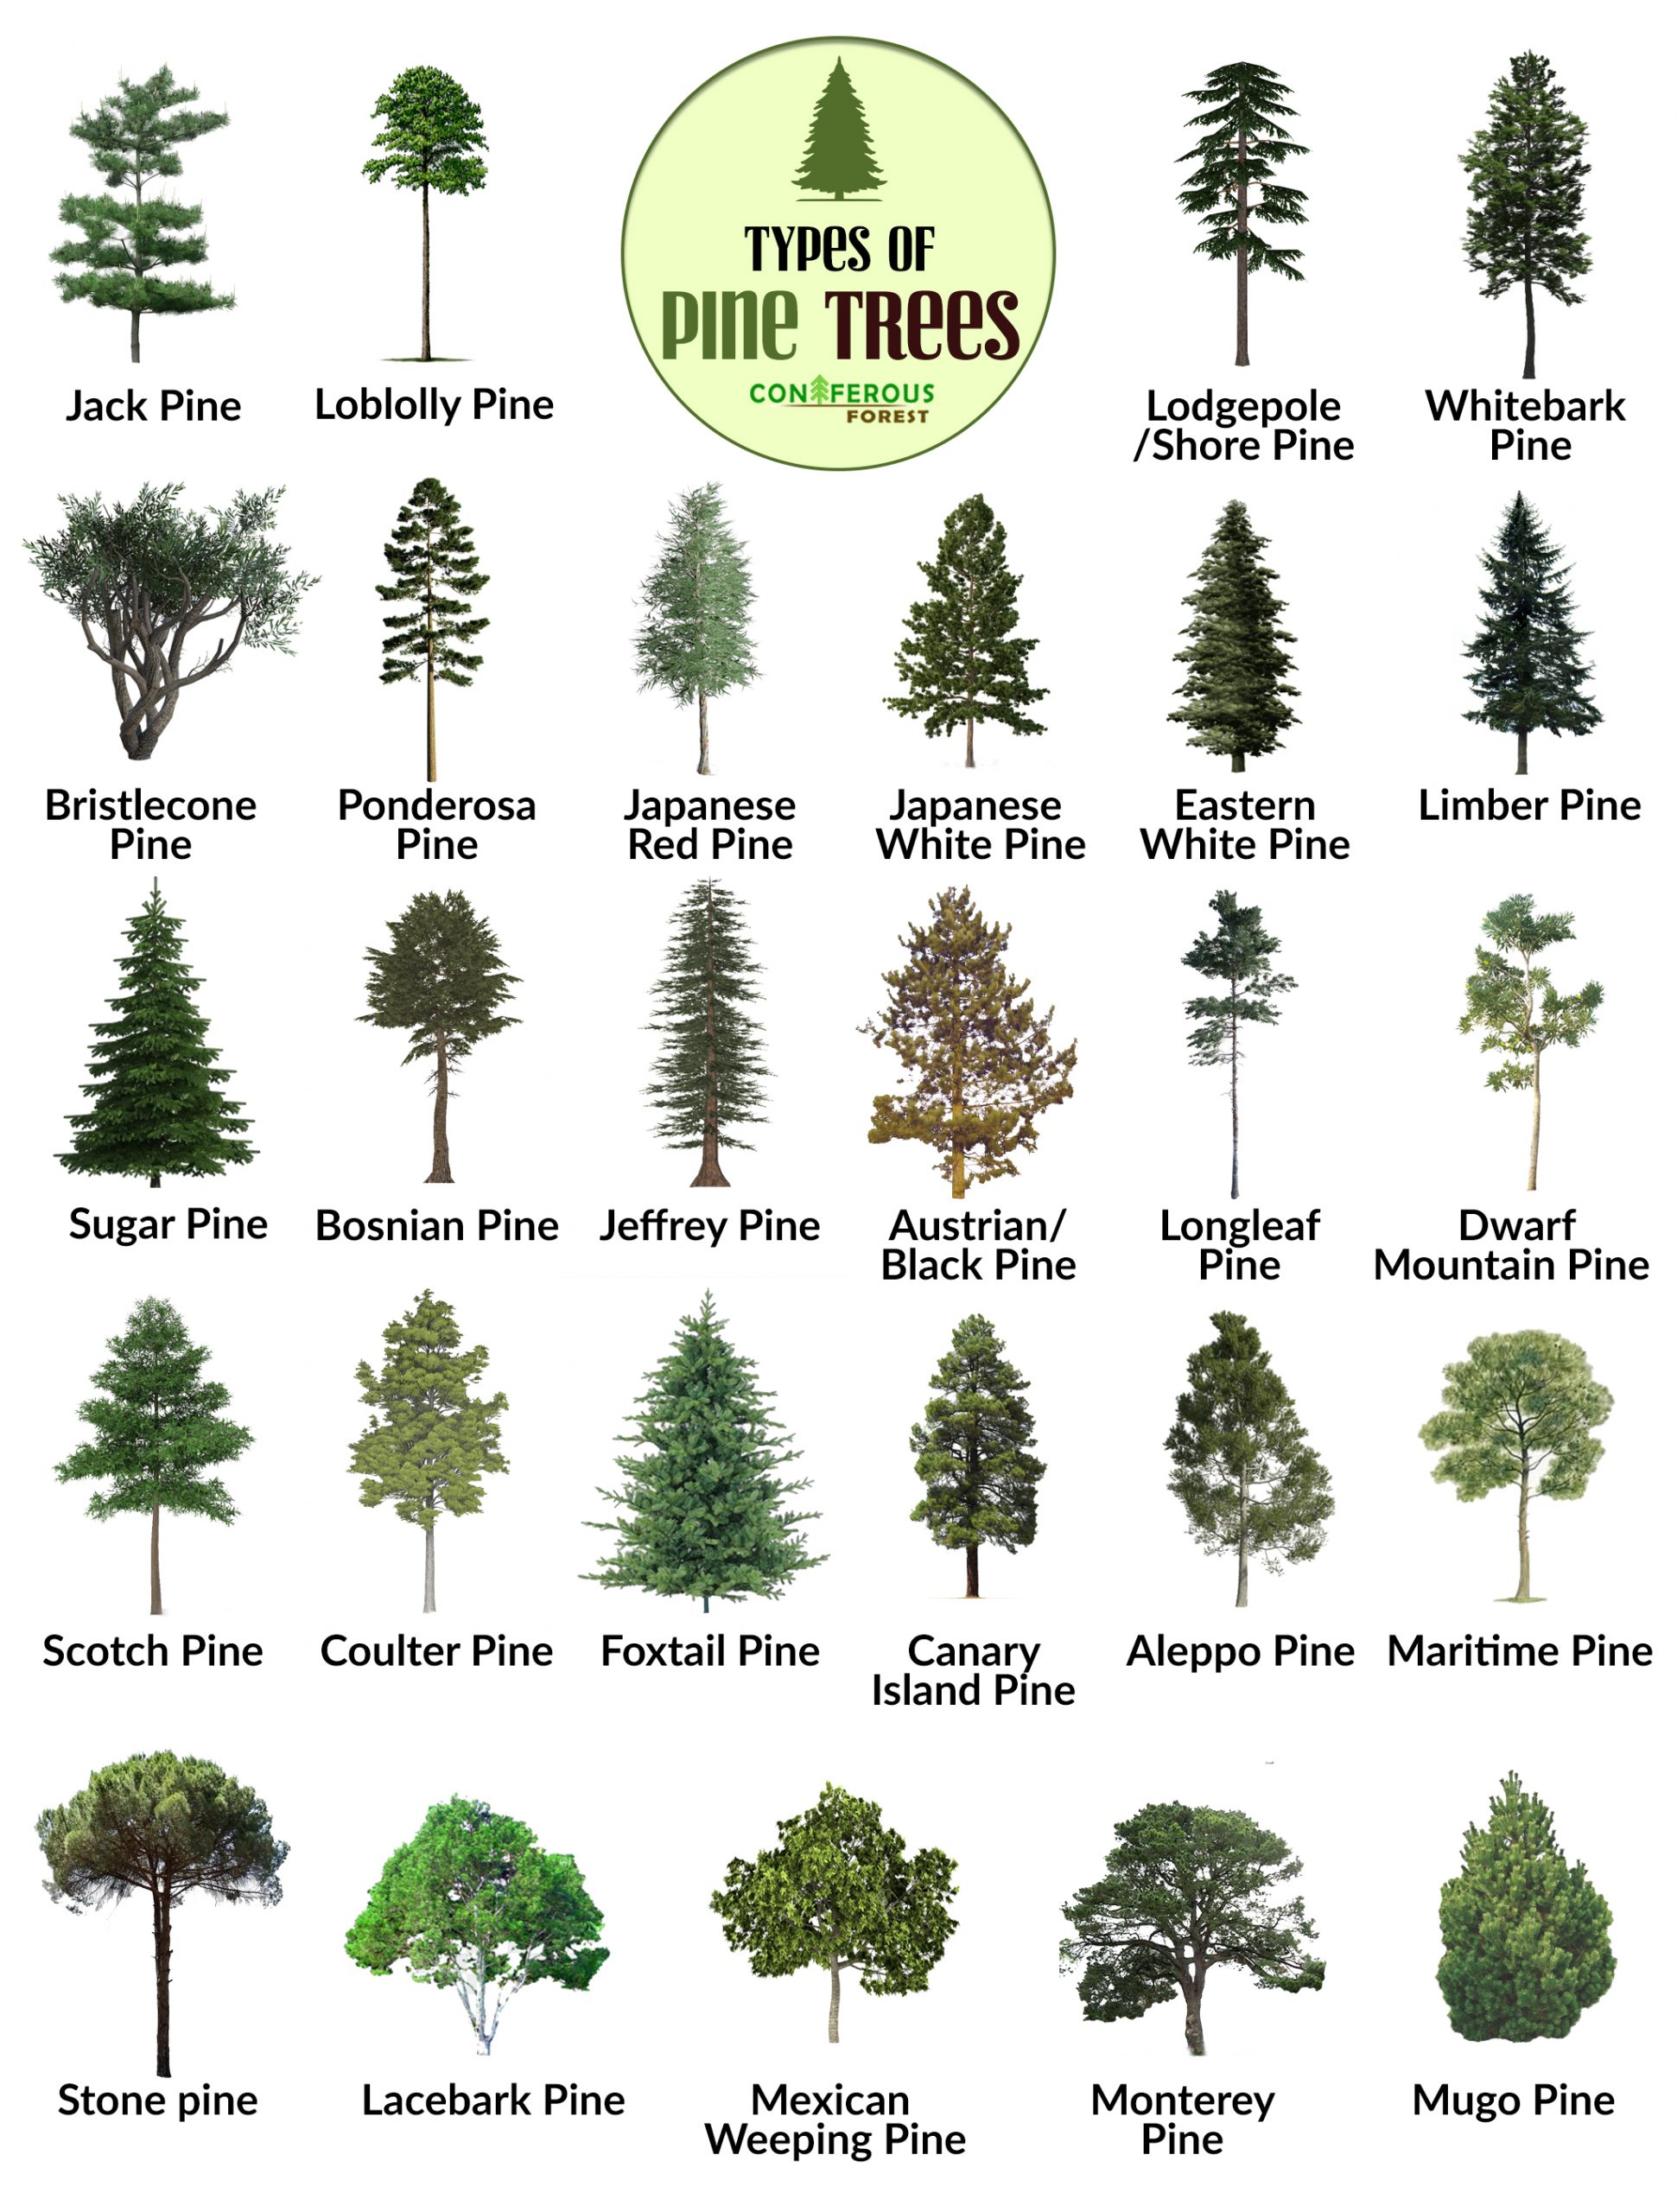 Pine Tree Facts, Types, Identification, Diseases, Pictures